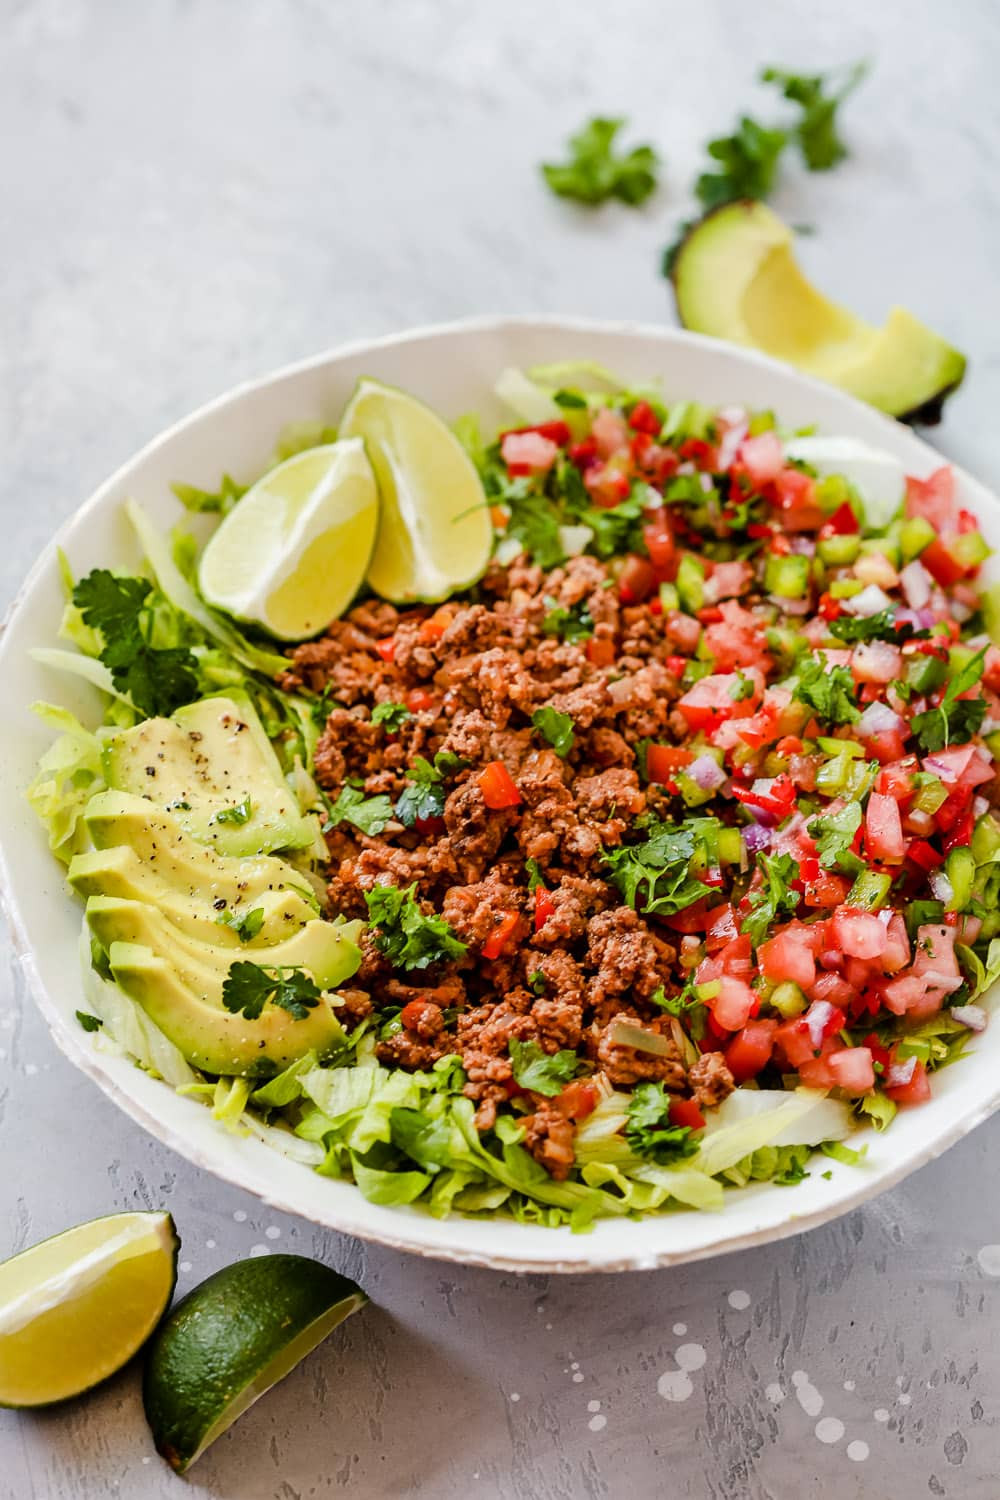 Ground Beef Salad Best Of Ground Beef Taco Salad Low Carb whole30 Paleo &amp; Gluten